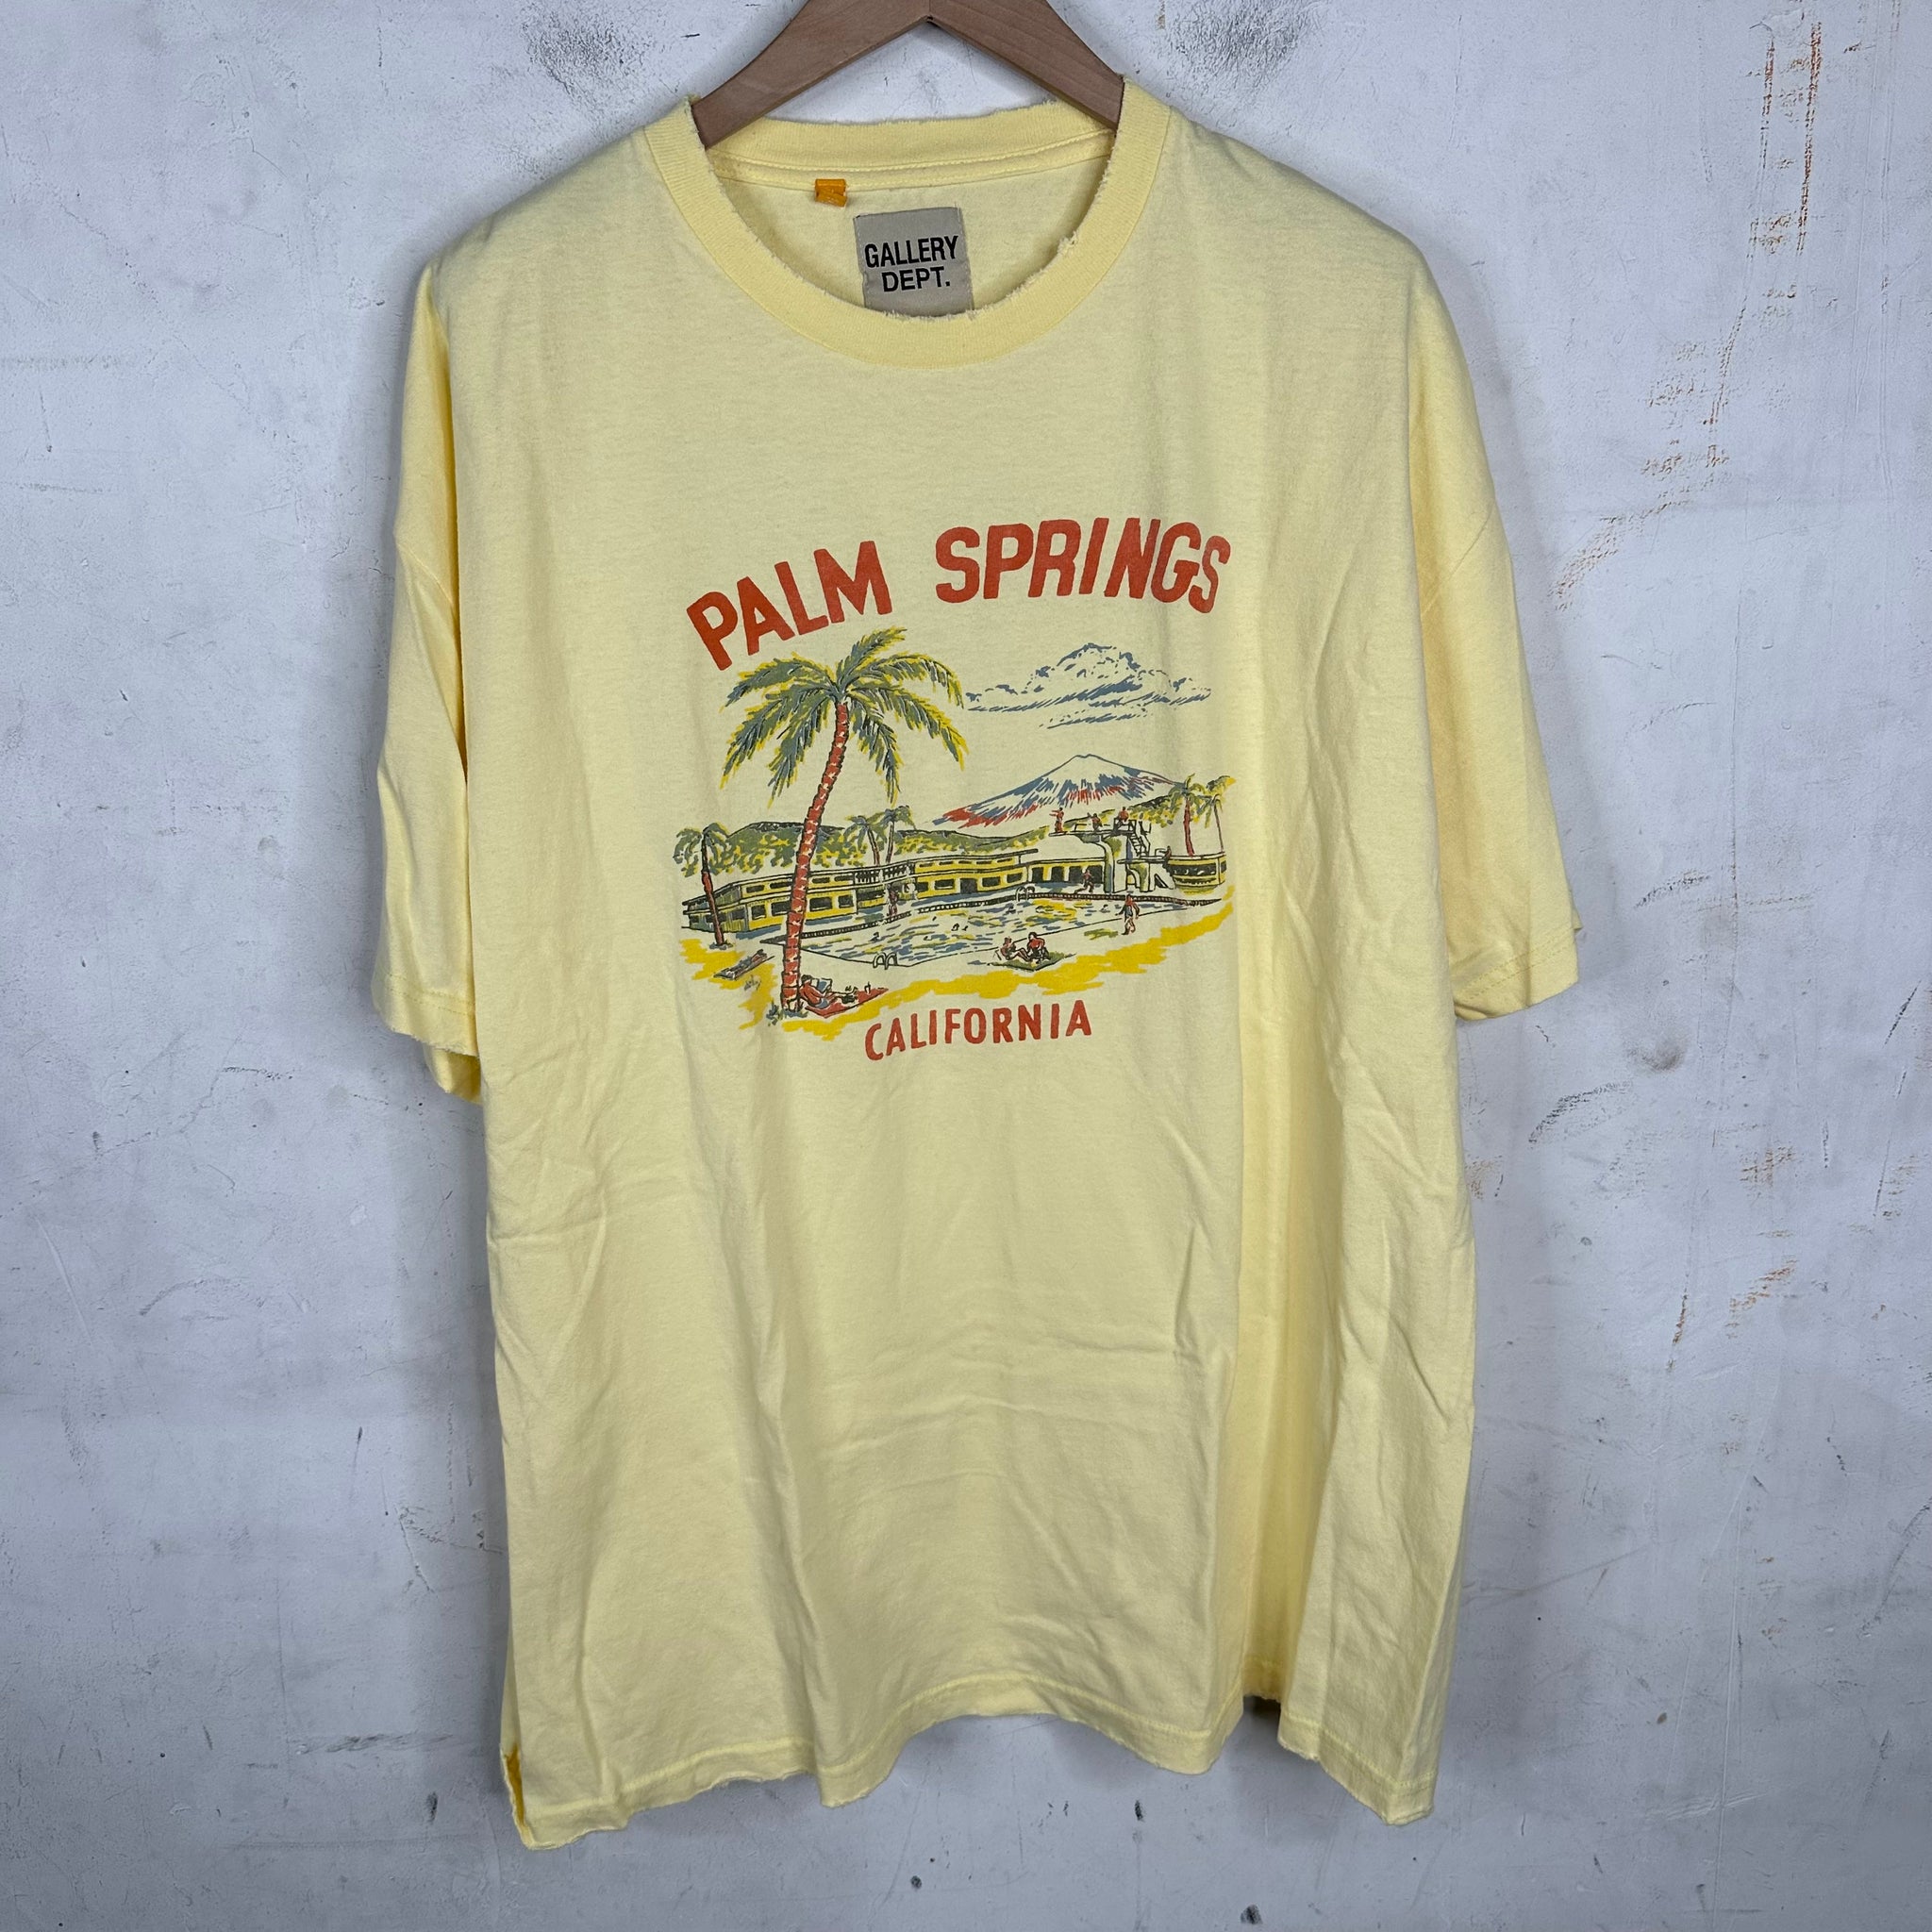 Gallery Dept. Yellow Palm Springs T-shirt